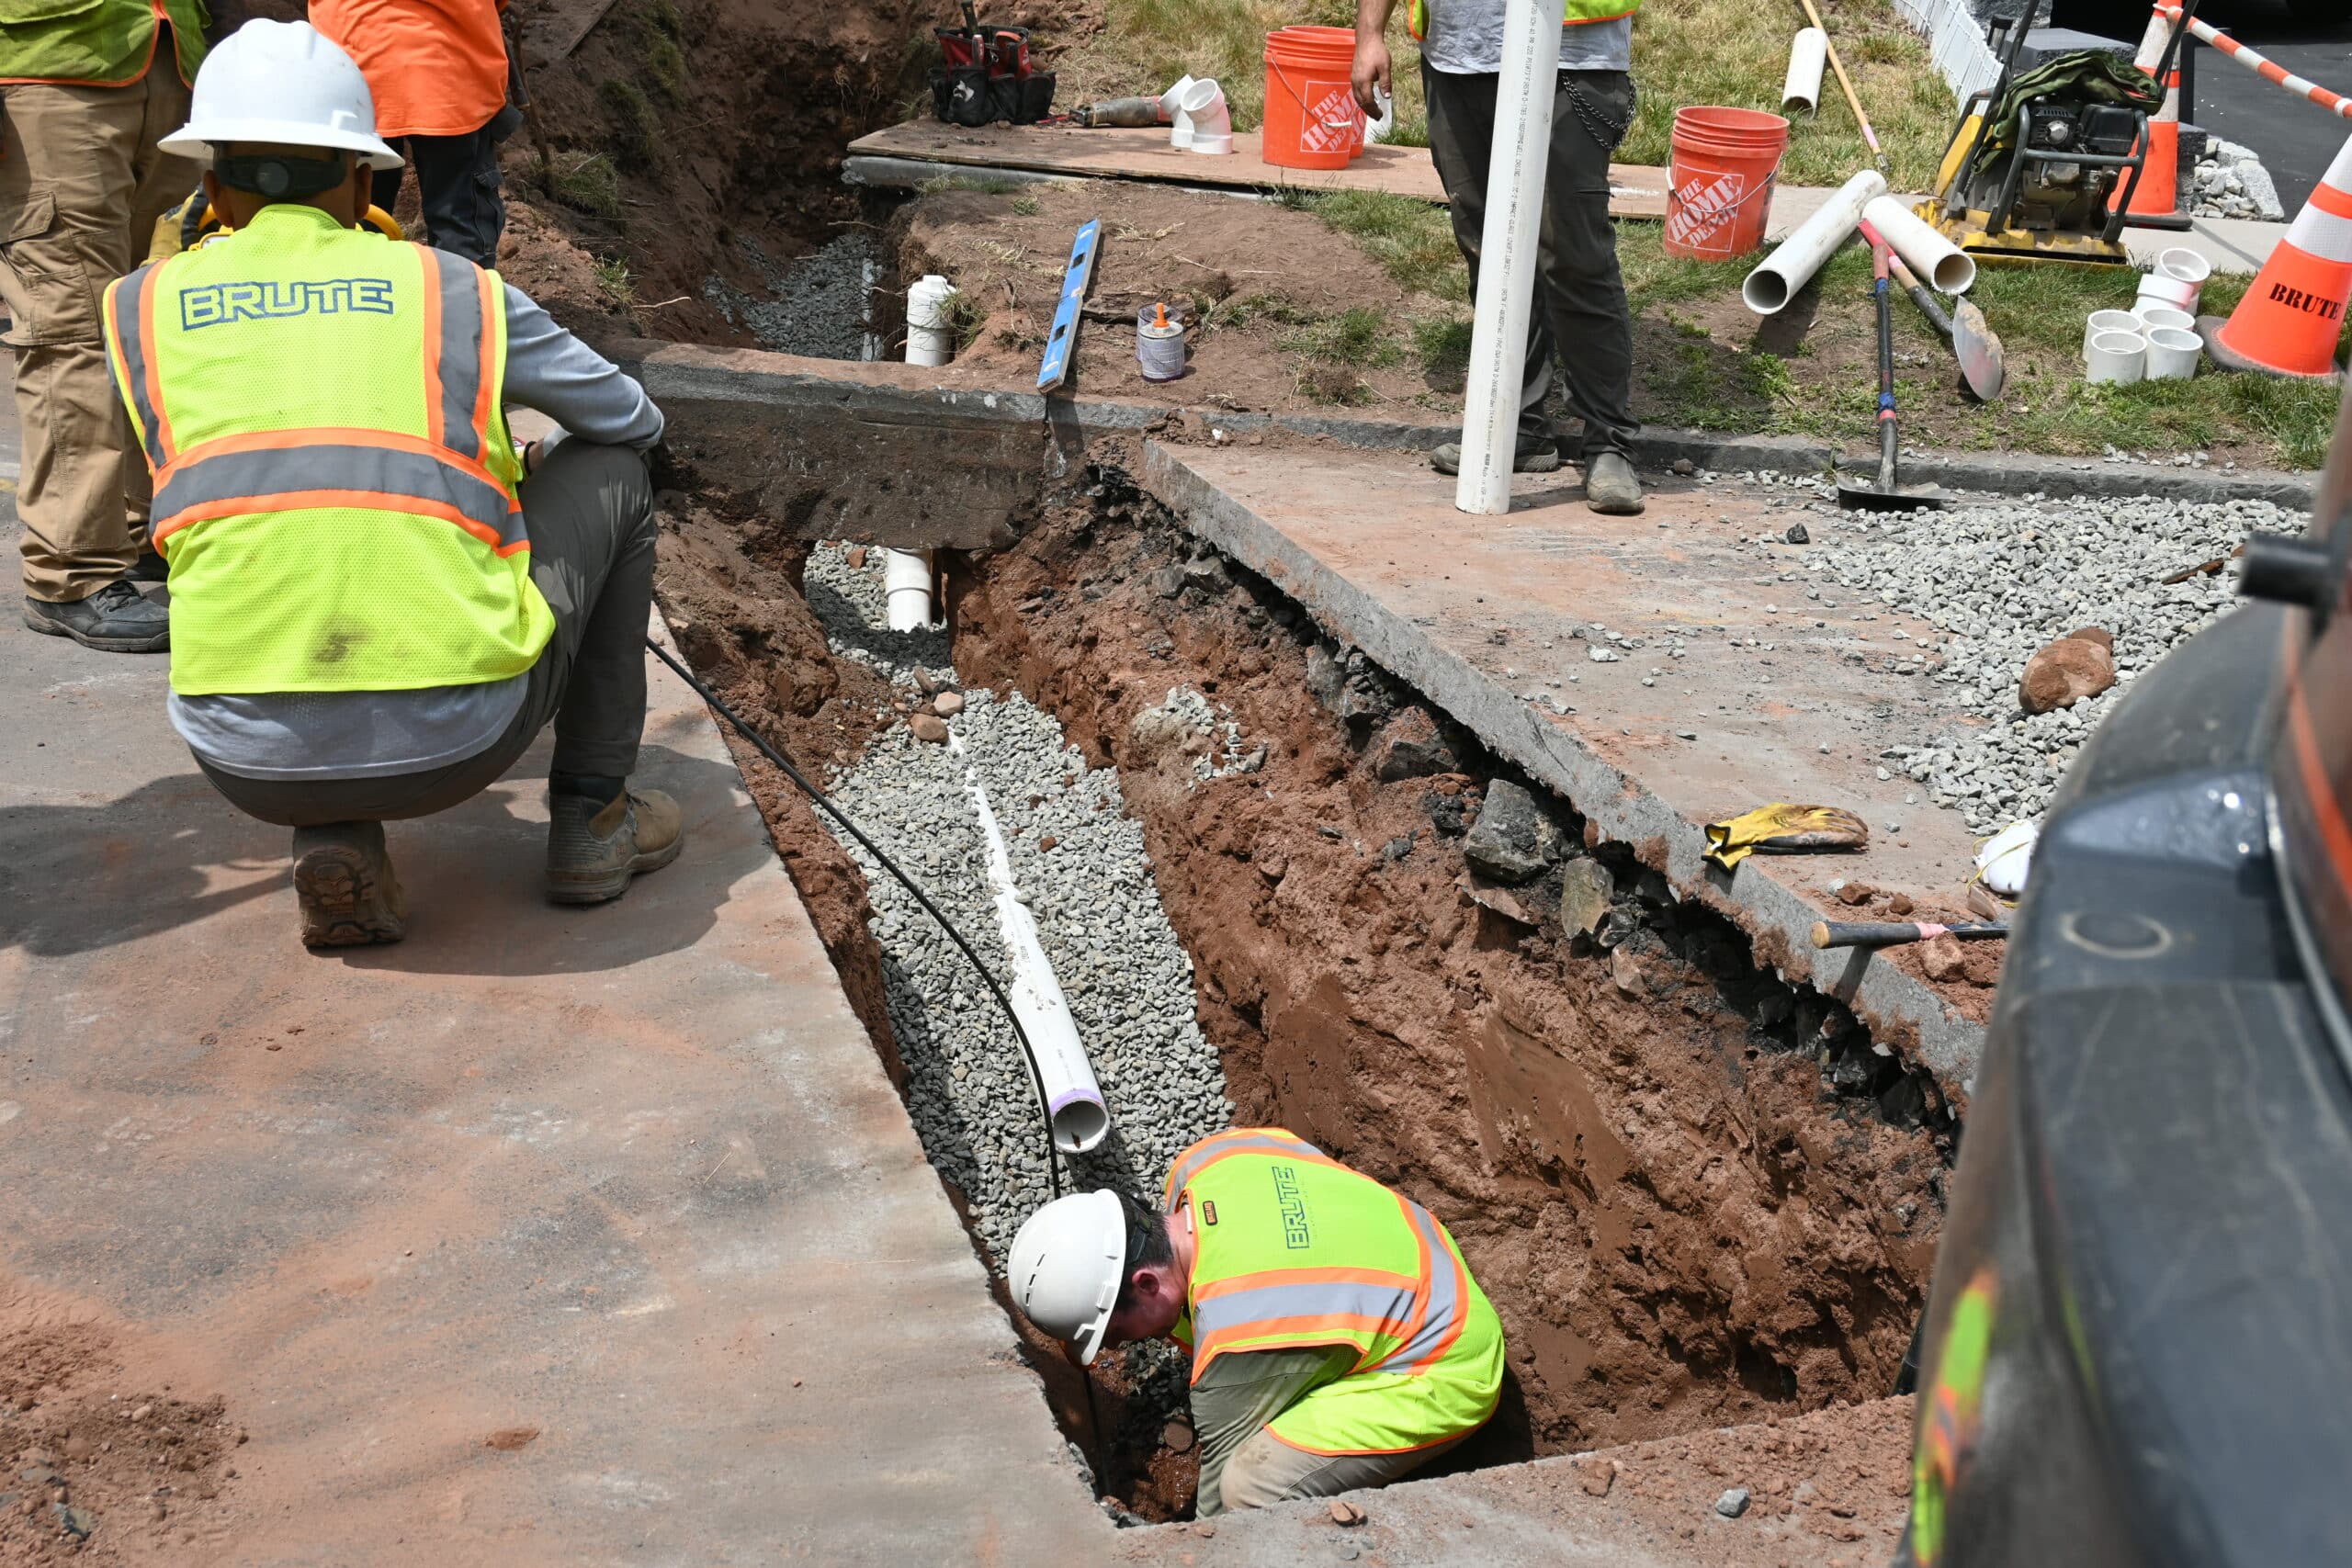 Main Sewer Line Contractors Replacing A Sewer Line in New Jersey